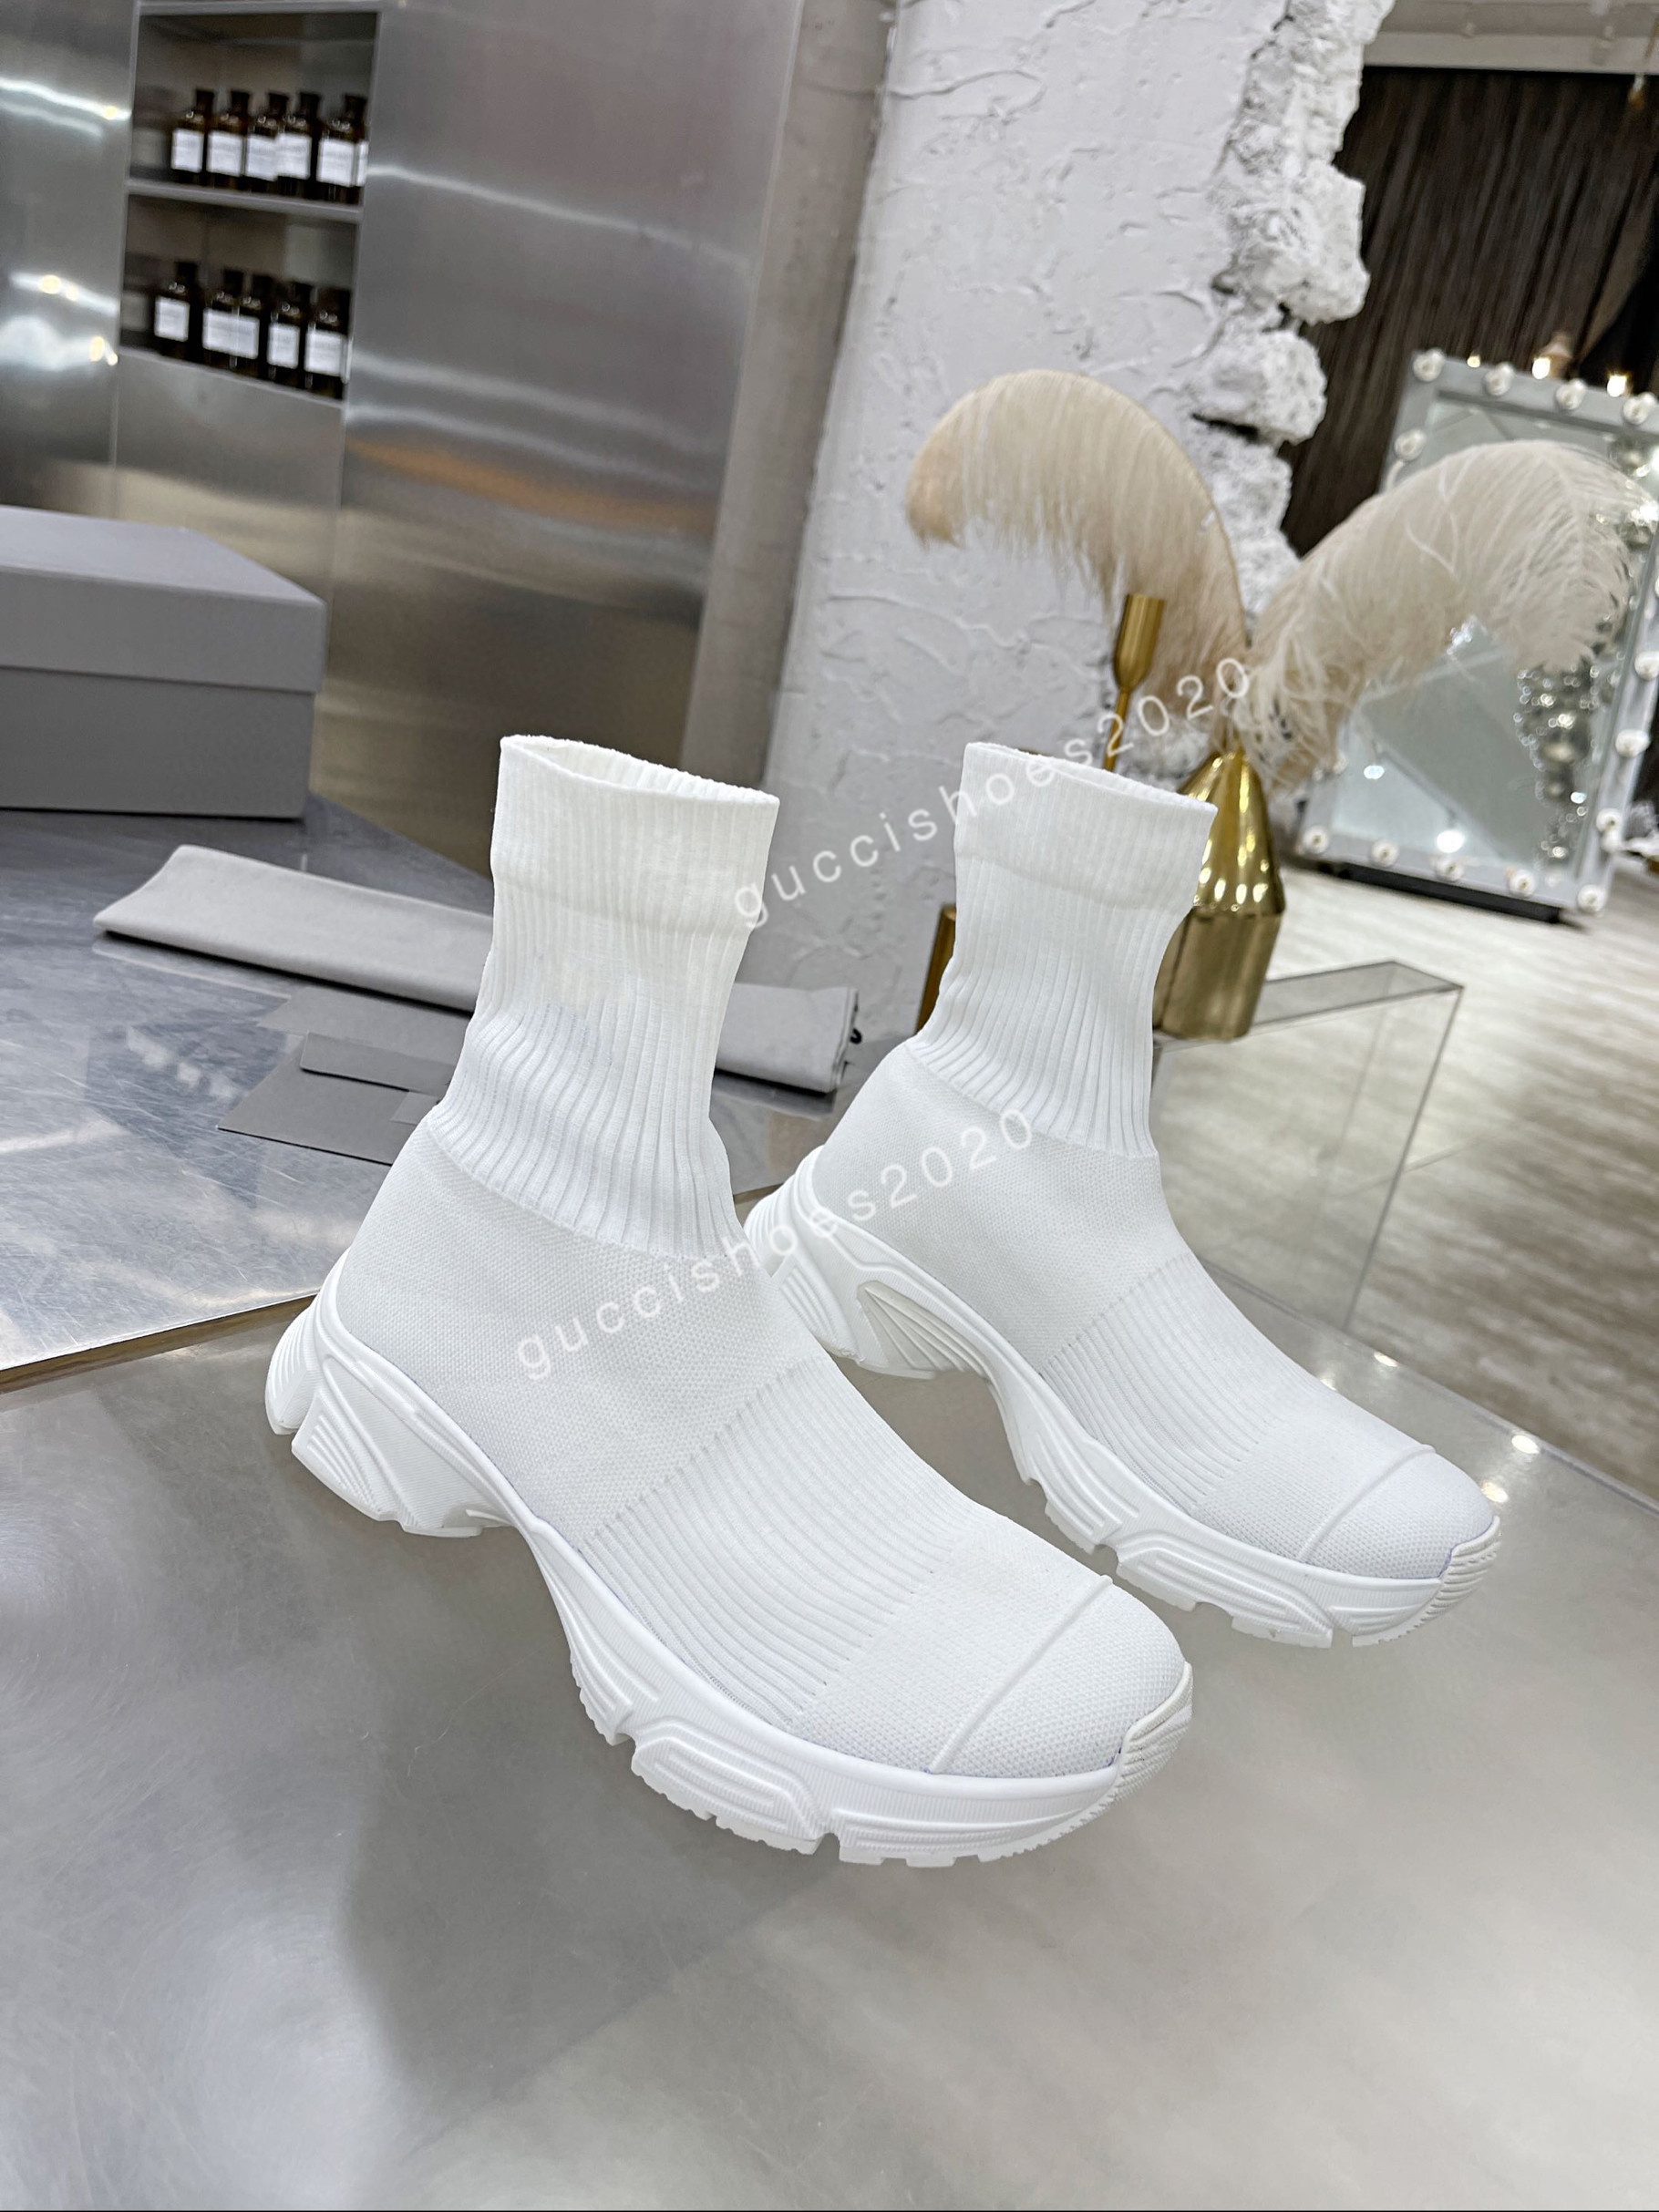 

2022 Top Quality Designer Boots Socks Shoes Casual Paris Rainbow Fashion Sock Women Men The Hacker Project Hight Increasing Old Dad Trainers Sneakers, 01